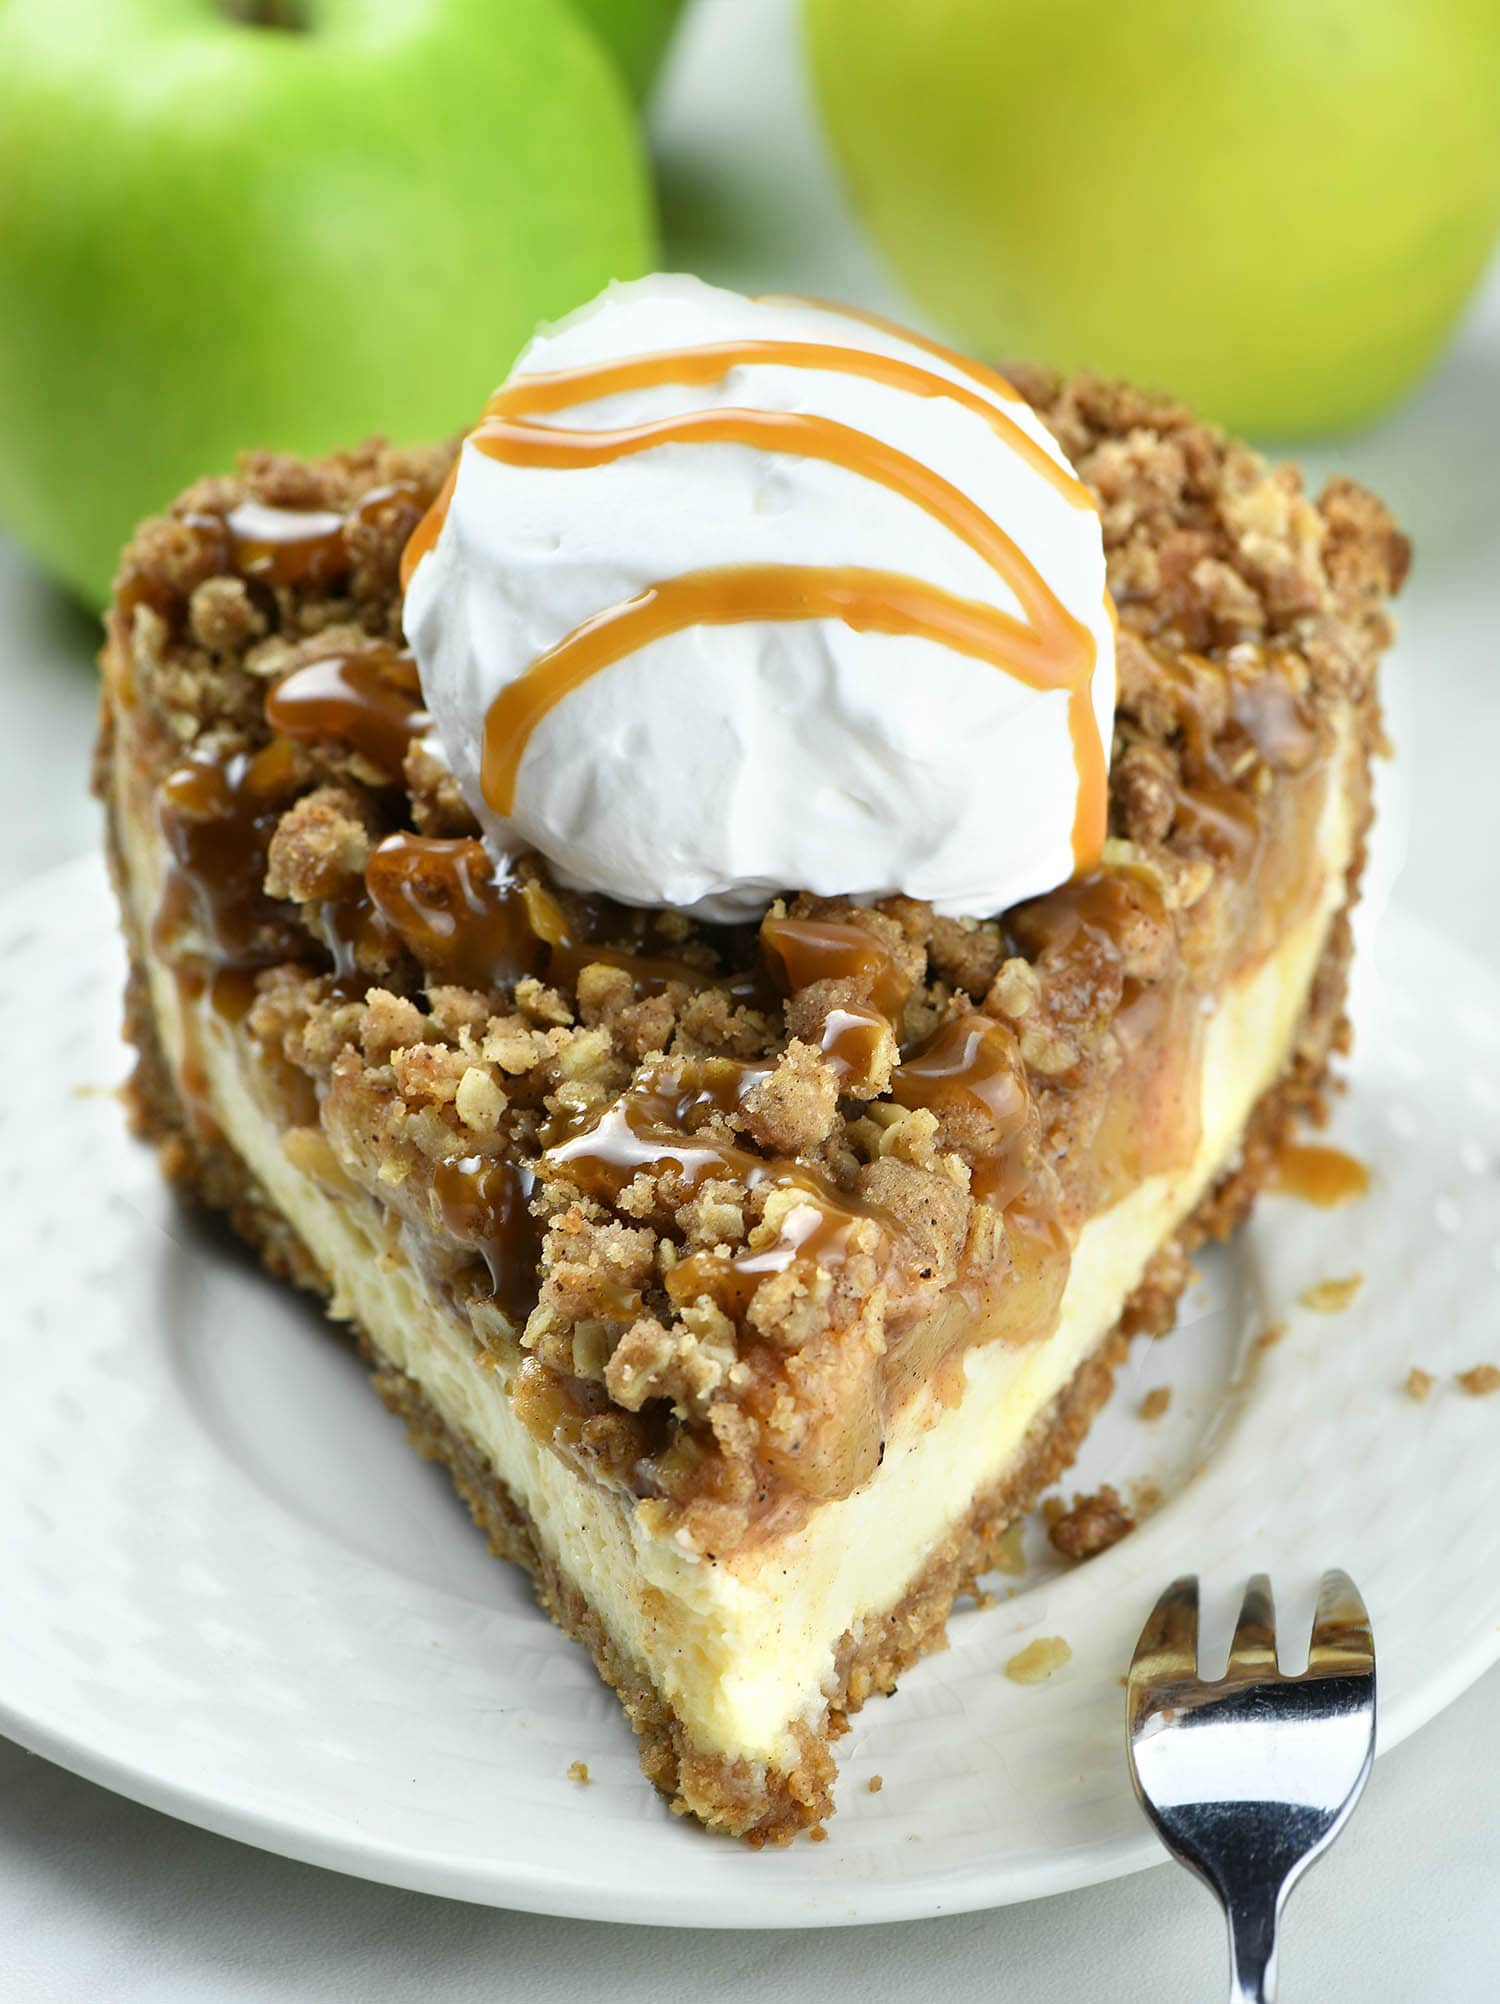 A slice of this Apple Crisp Cheesecake Pie will make you happy and satisfied even on a cold and rainy fall day.